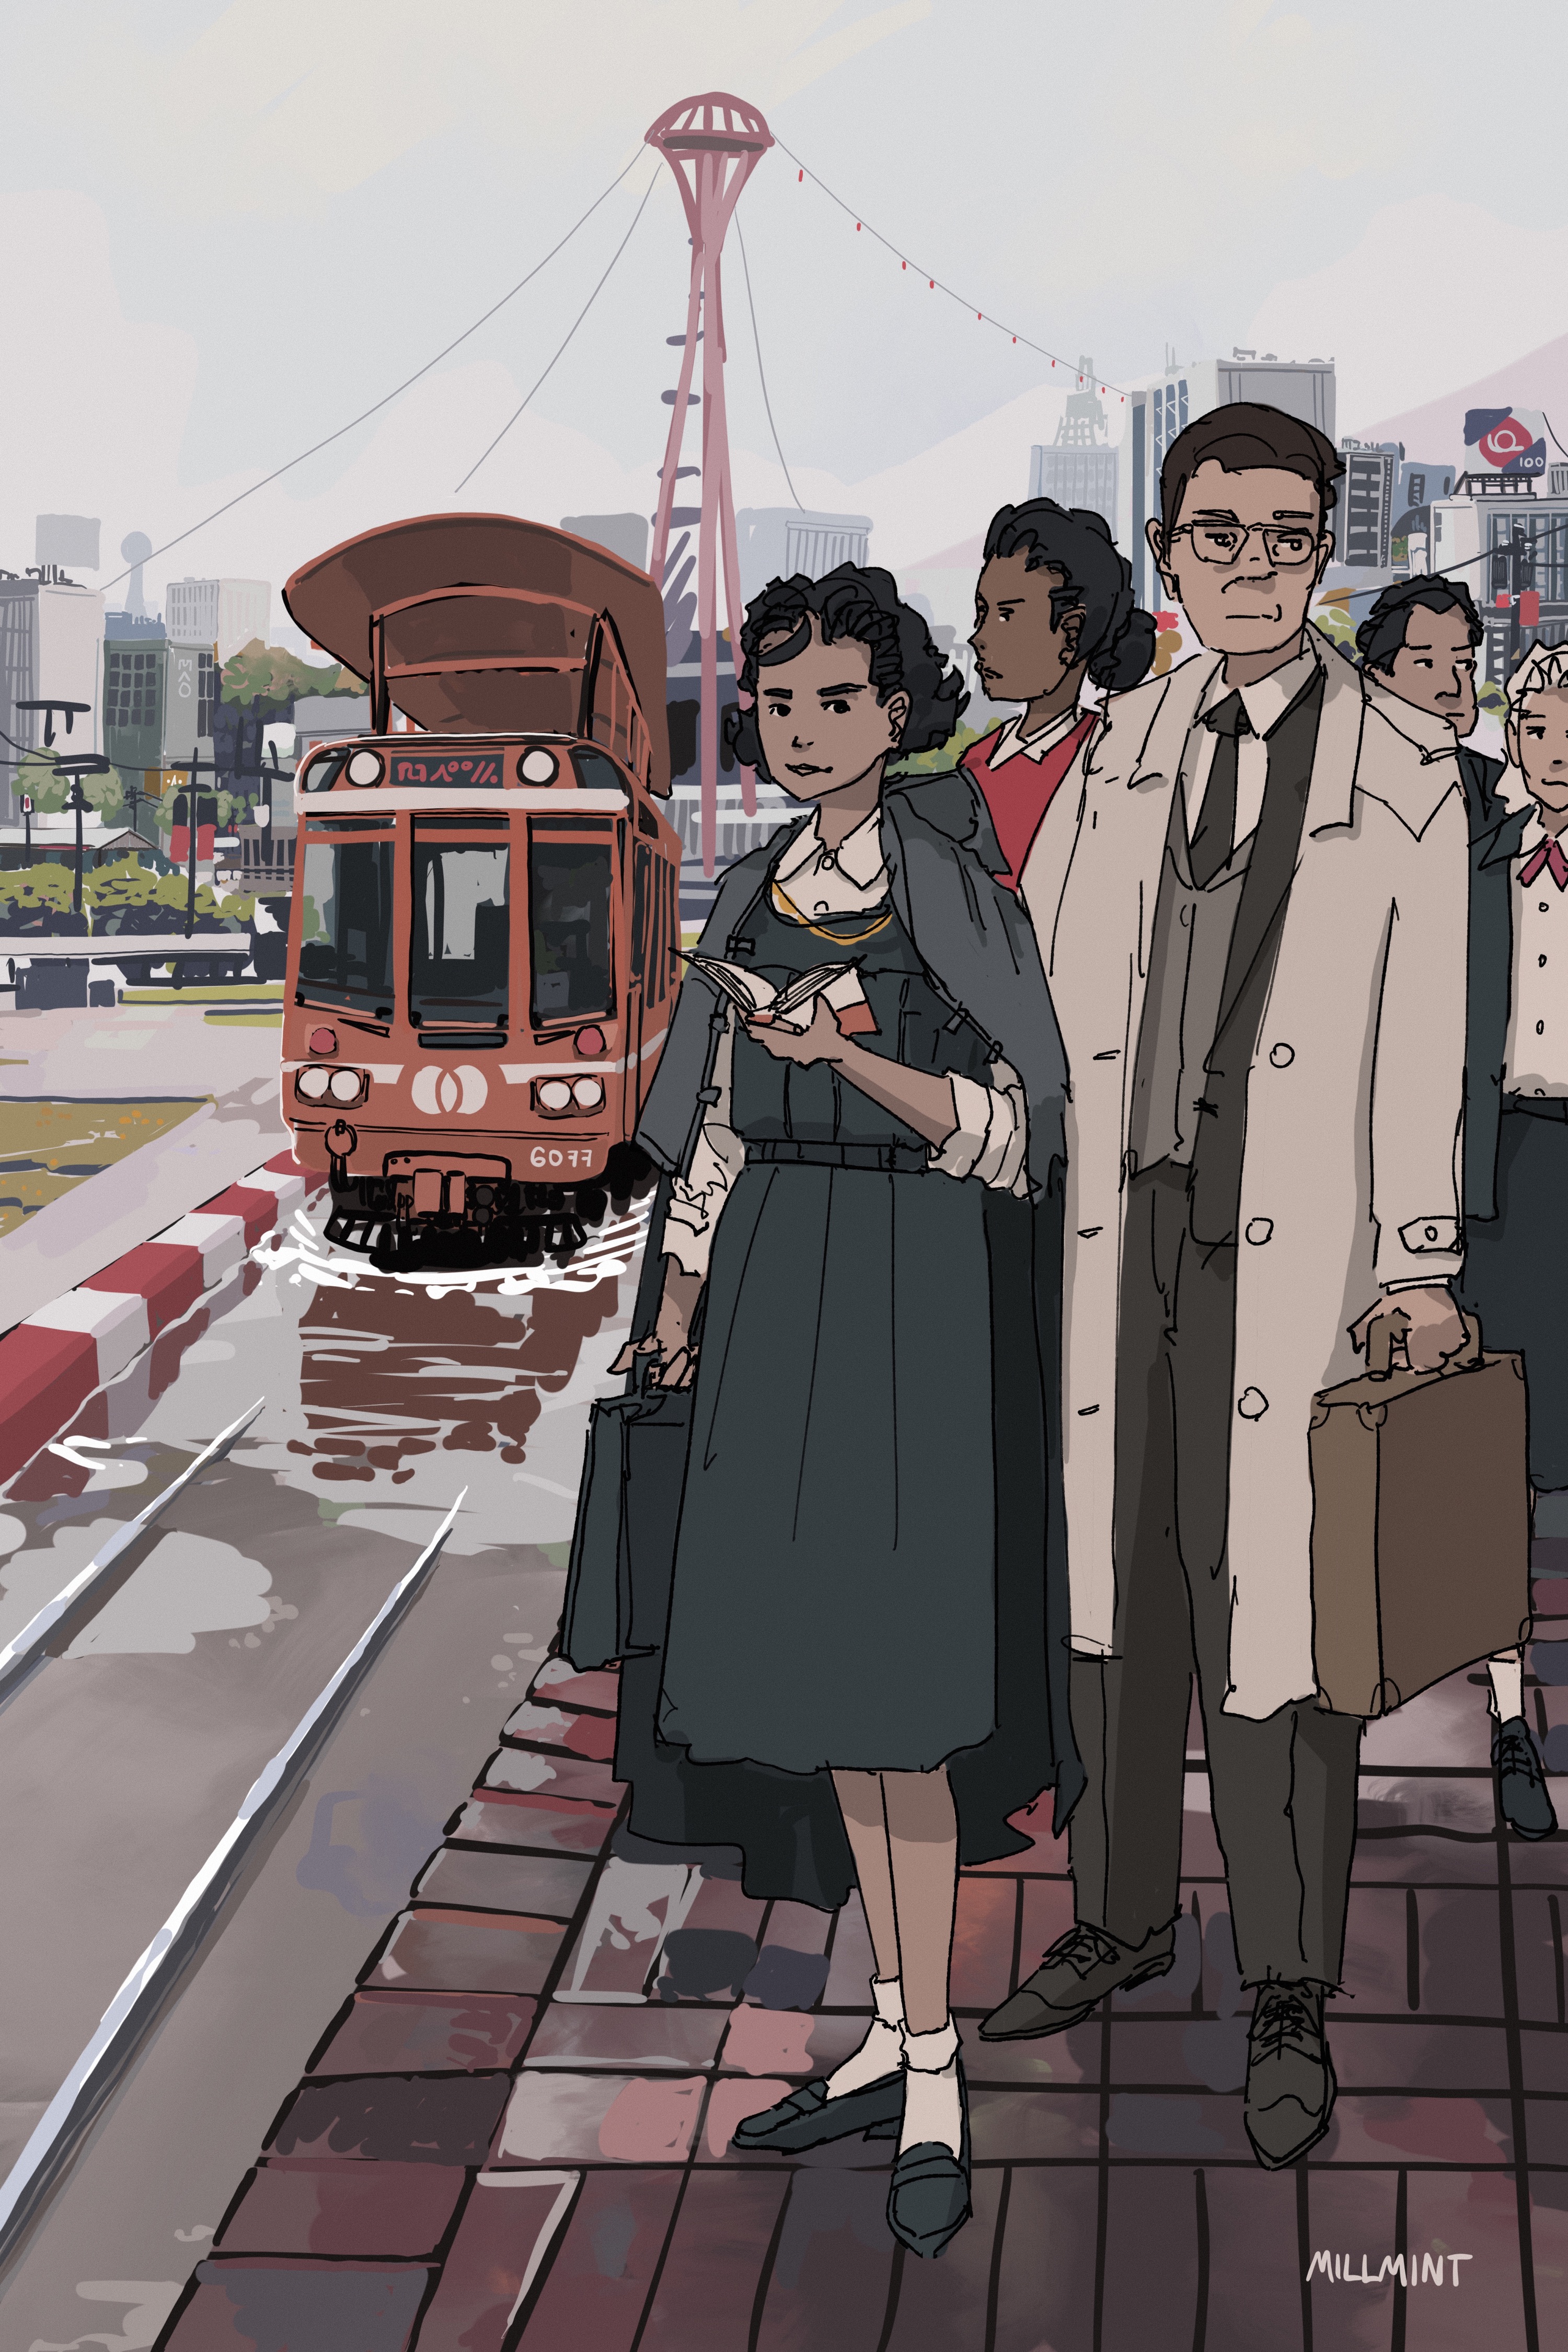 Image of Tzipora and strangers waiting for a tram on a misty day